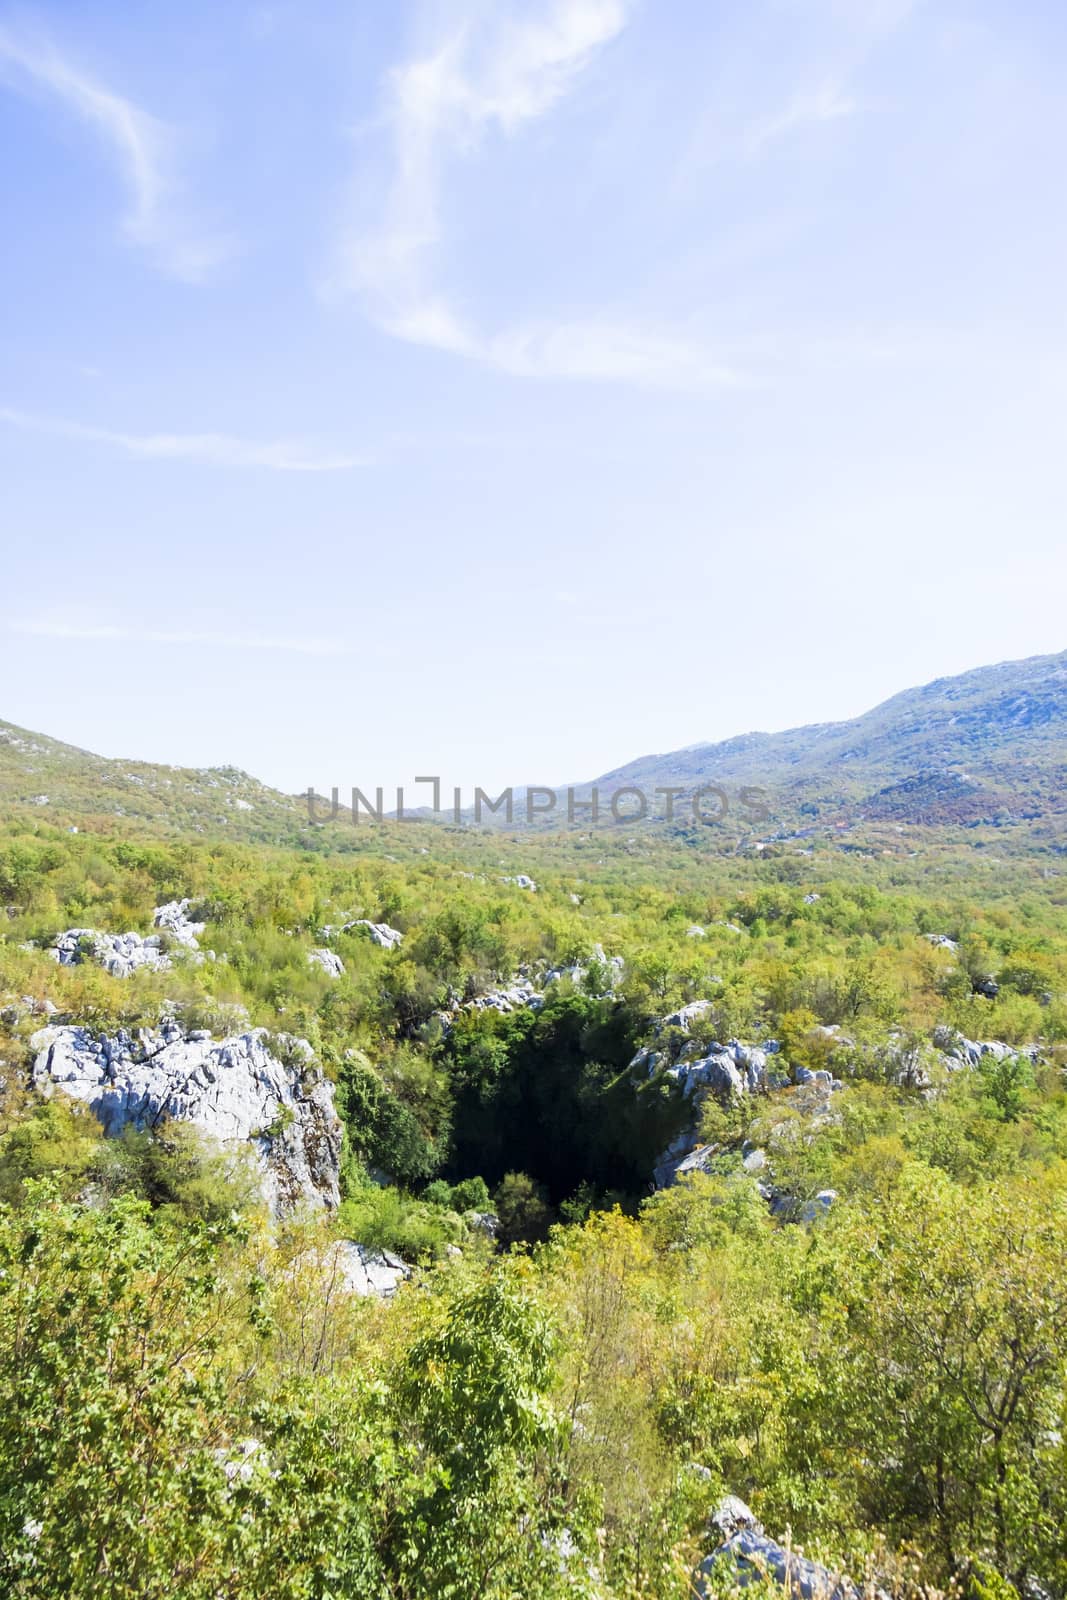 the entrance to a cave in the mountains of Dalmatia, Croatia